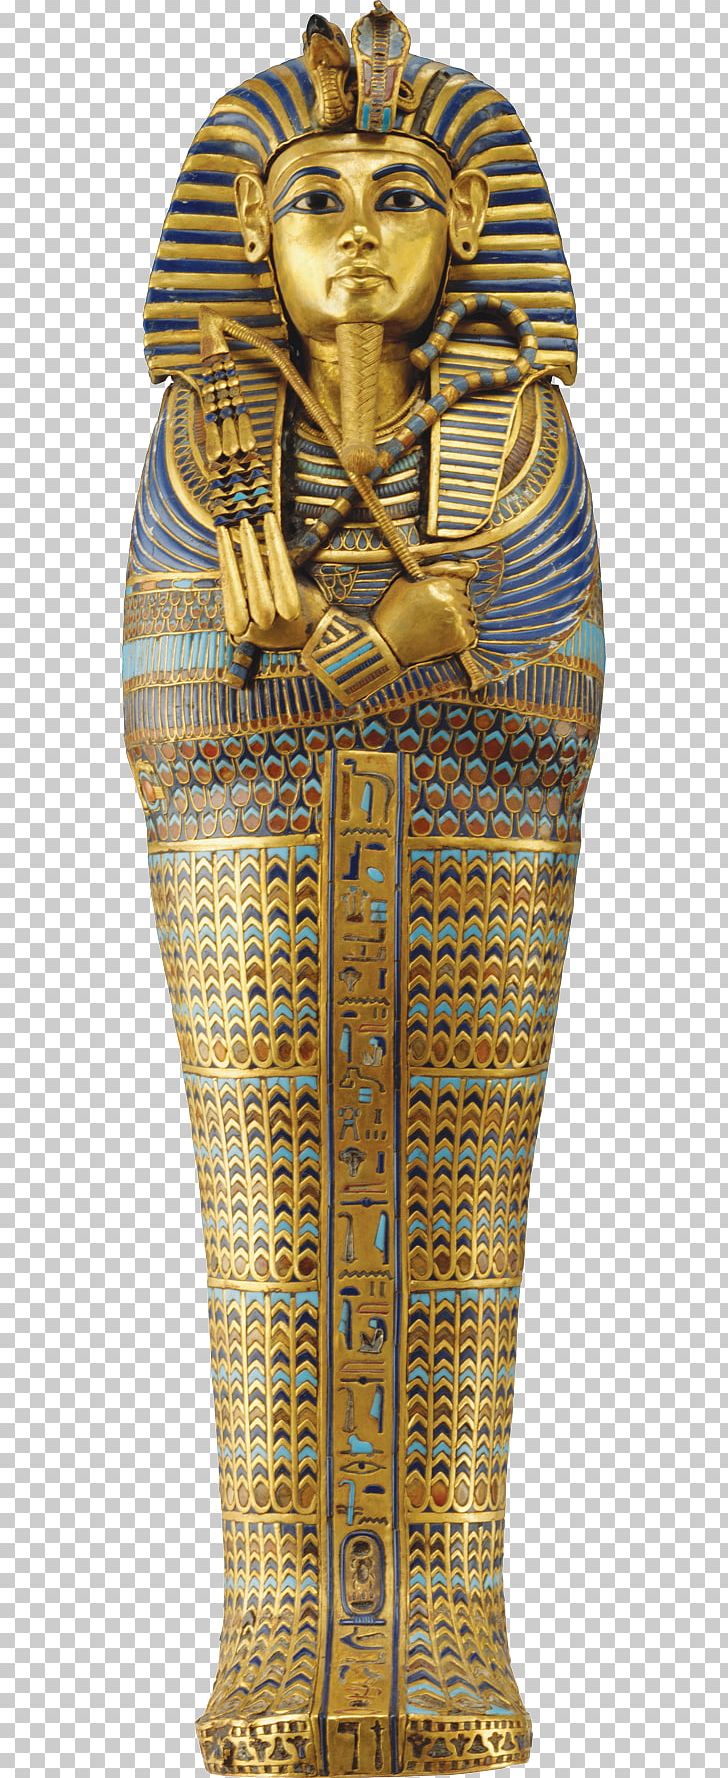 KV62 Tutankhamun Ancient Egypt Egyptian Museum Pharaoh PNG, Clipart, Amarna, Ancient Egypt, Ancient History, Artifact, Brass Free PNG Download